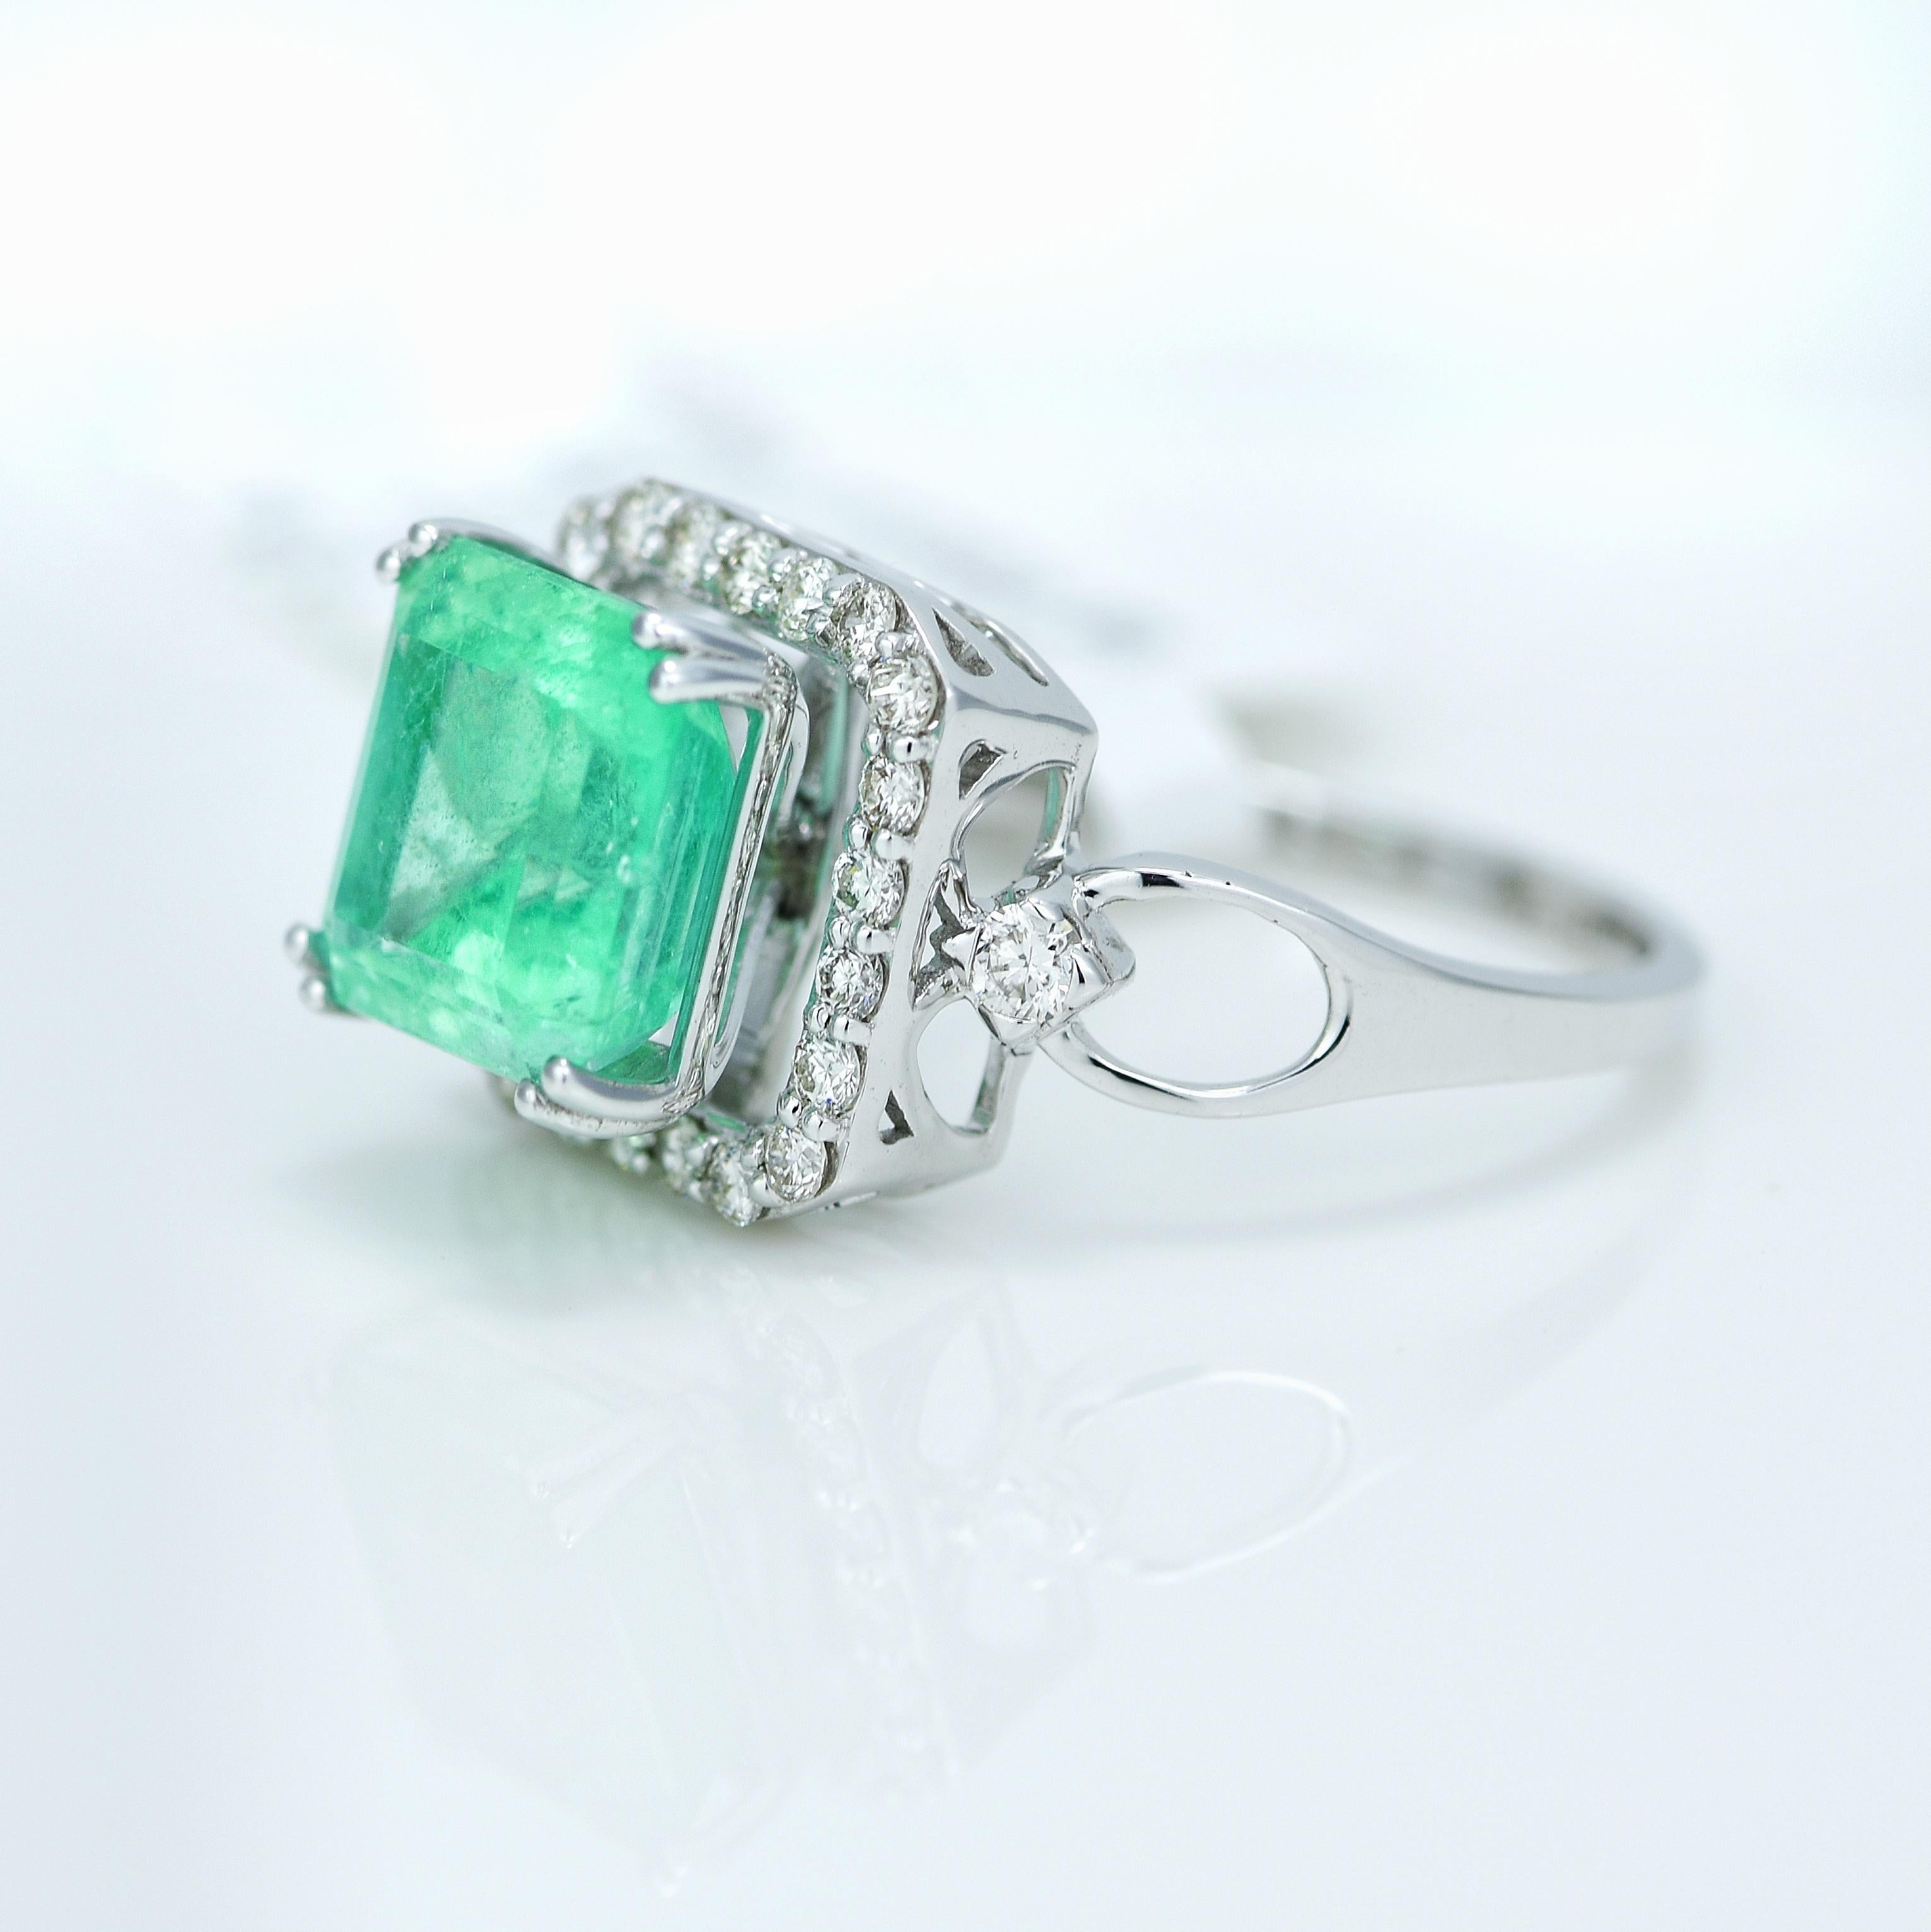 Stunning Green Colombian Emerald and Diamond Halo Ring IGI Certified.

Centre Stone - Colombian Green Emerald

Centre Stone Weight - 2.95 Carat, 

Centre Stone Origin - Colombian

Total Number of Diamonds - 24

Diamonds Carat Weight - 0.39 carat (